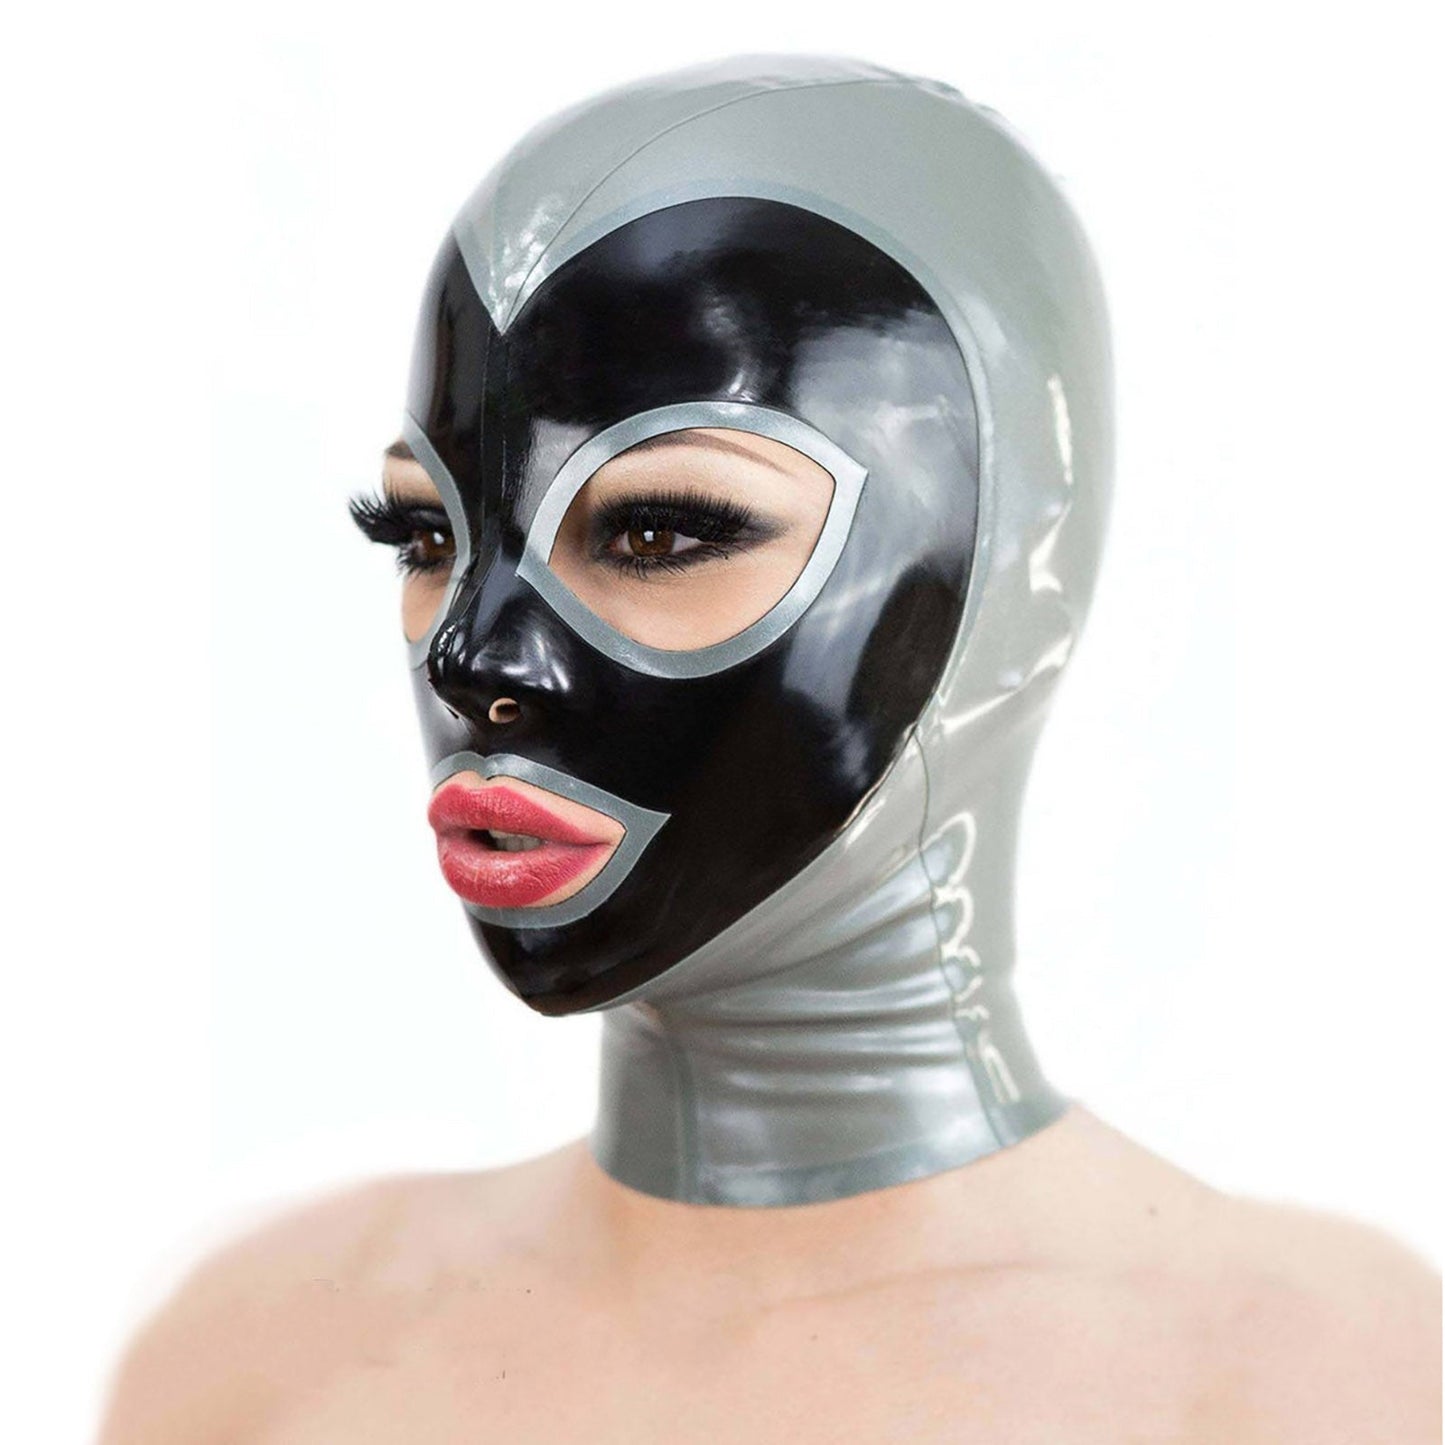 MONNIK Latex Mask Open Eyes&Mouth Grey&black Color Hood with Rear Zipper Handmade for Latex Catsuit Cosplay